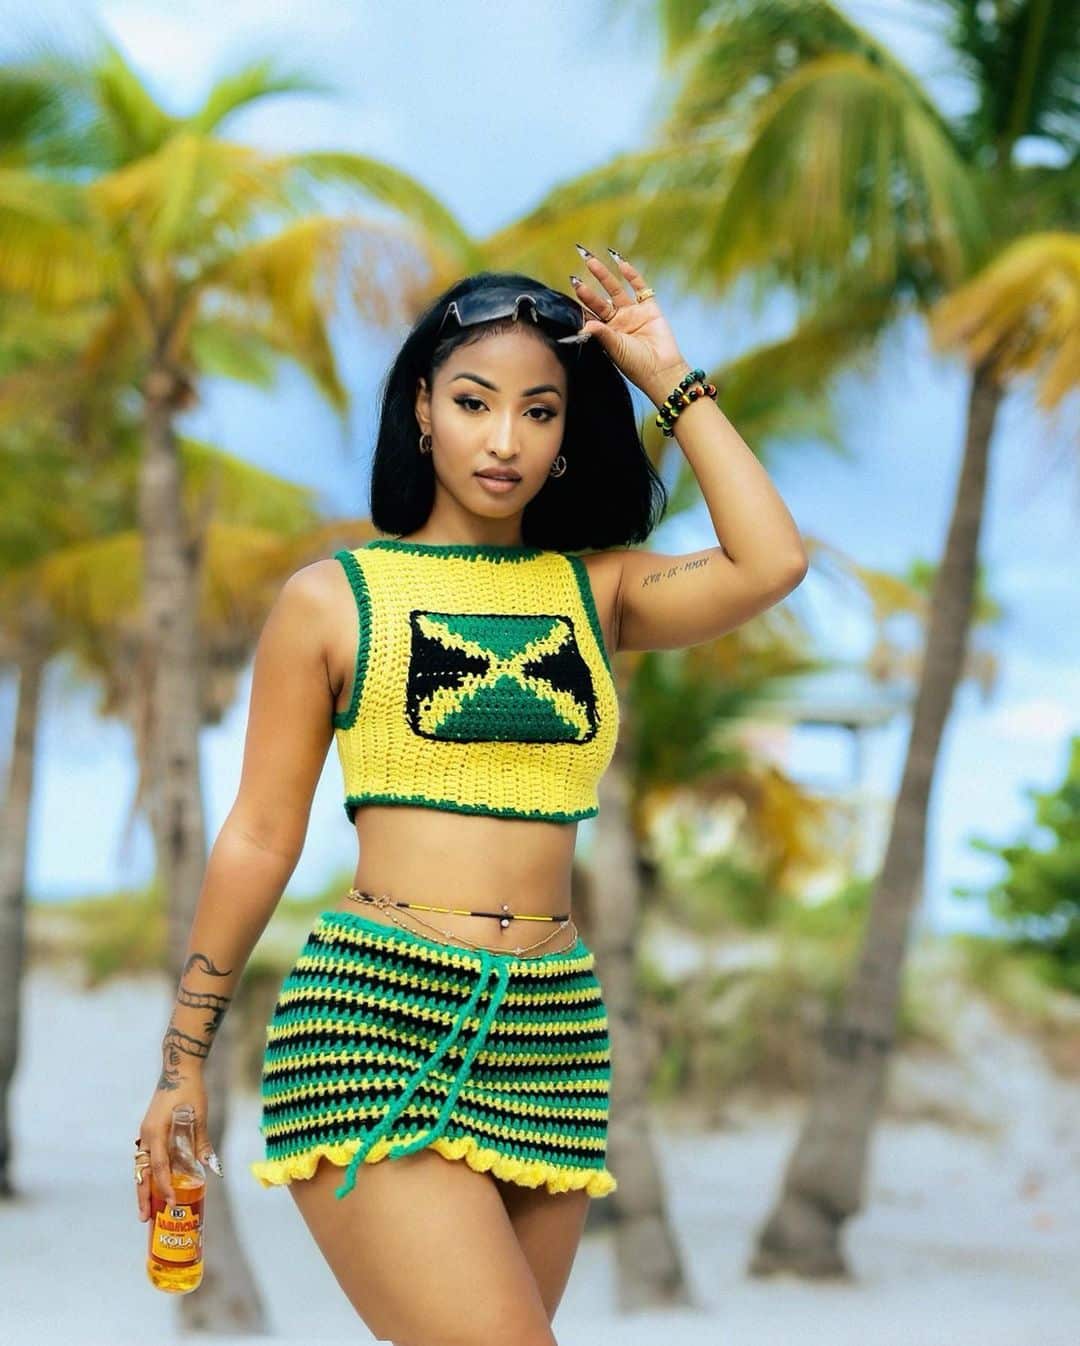 Portable Shenseea request jamaican link up 